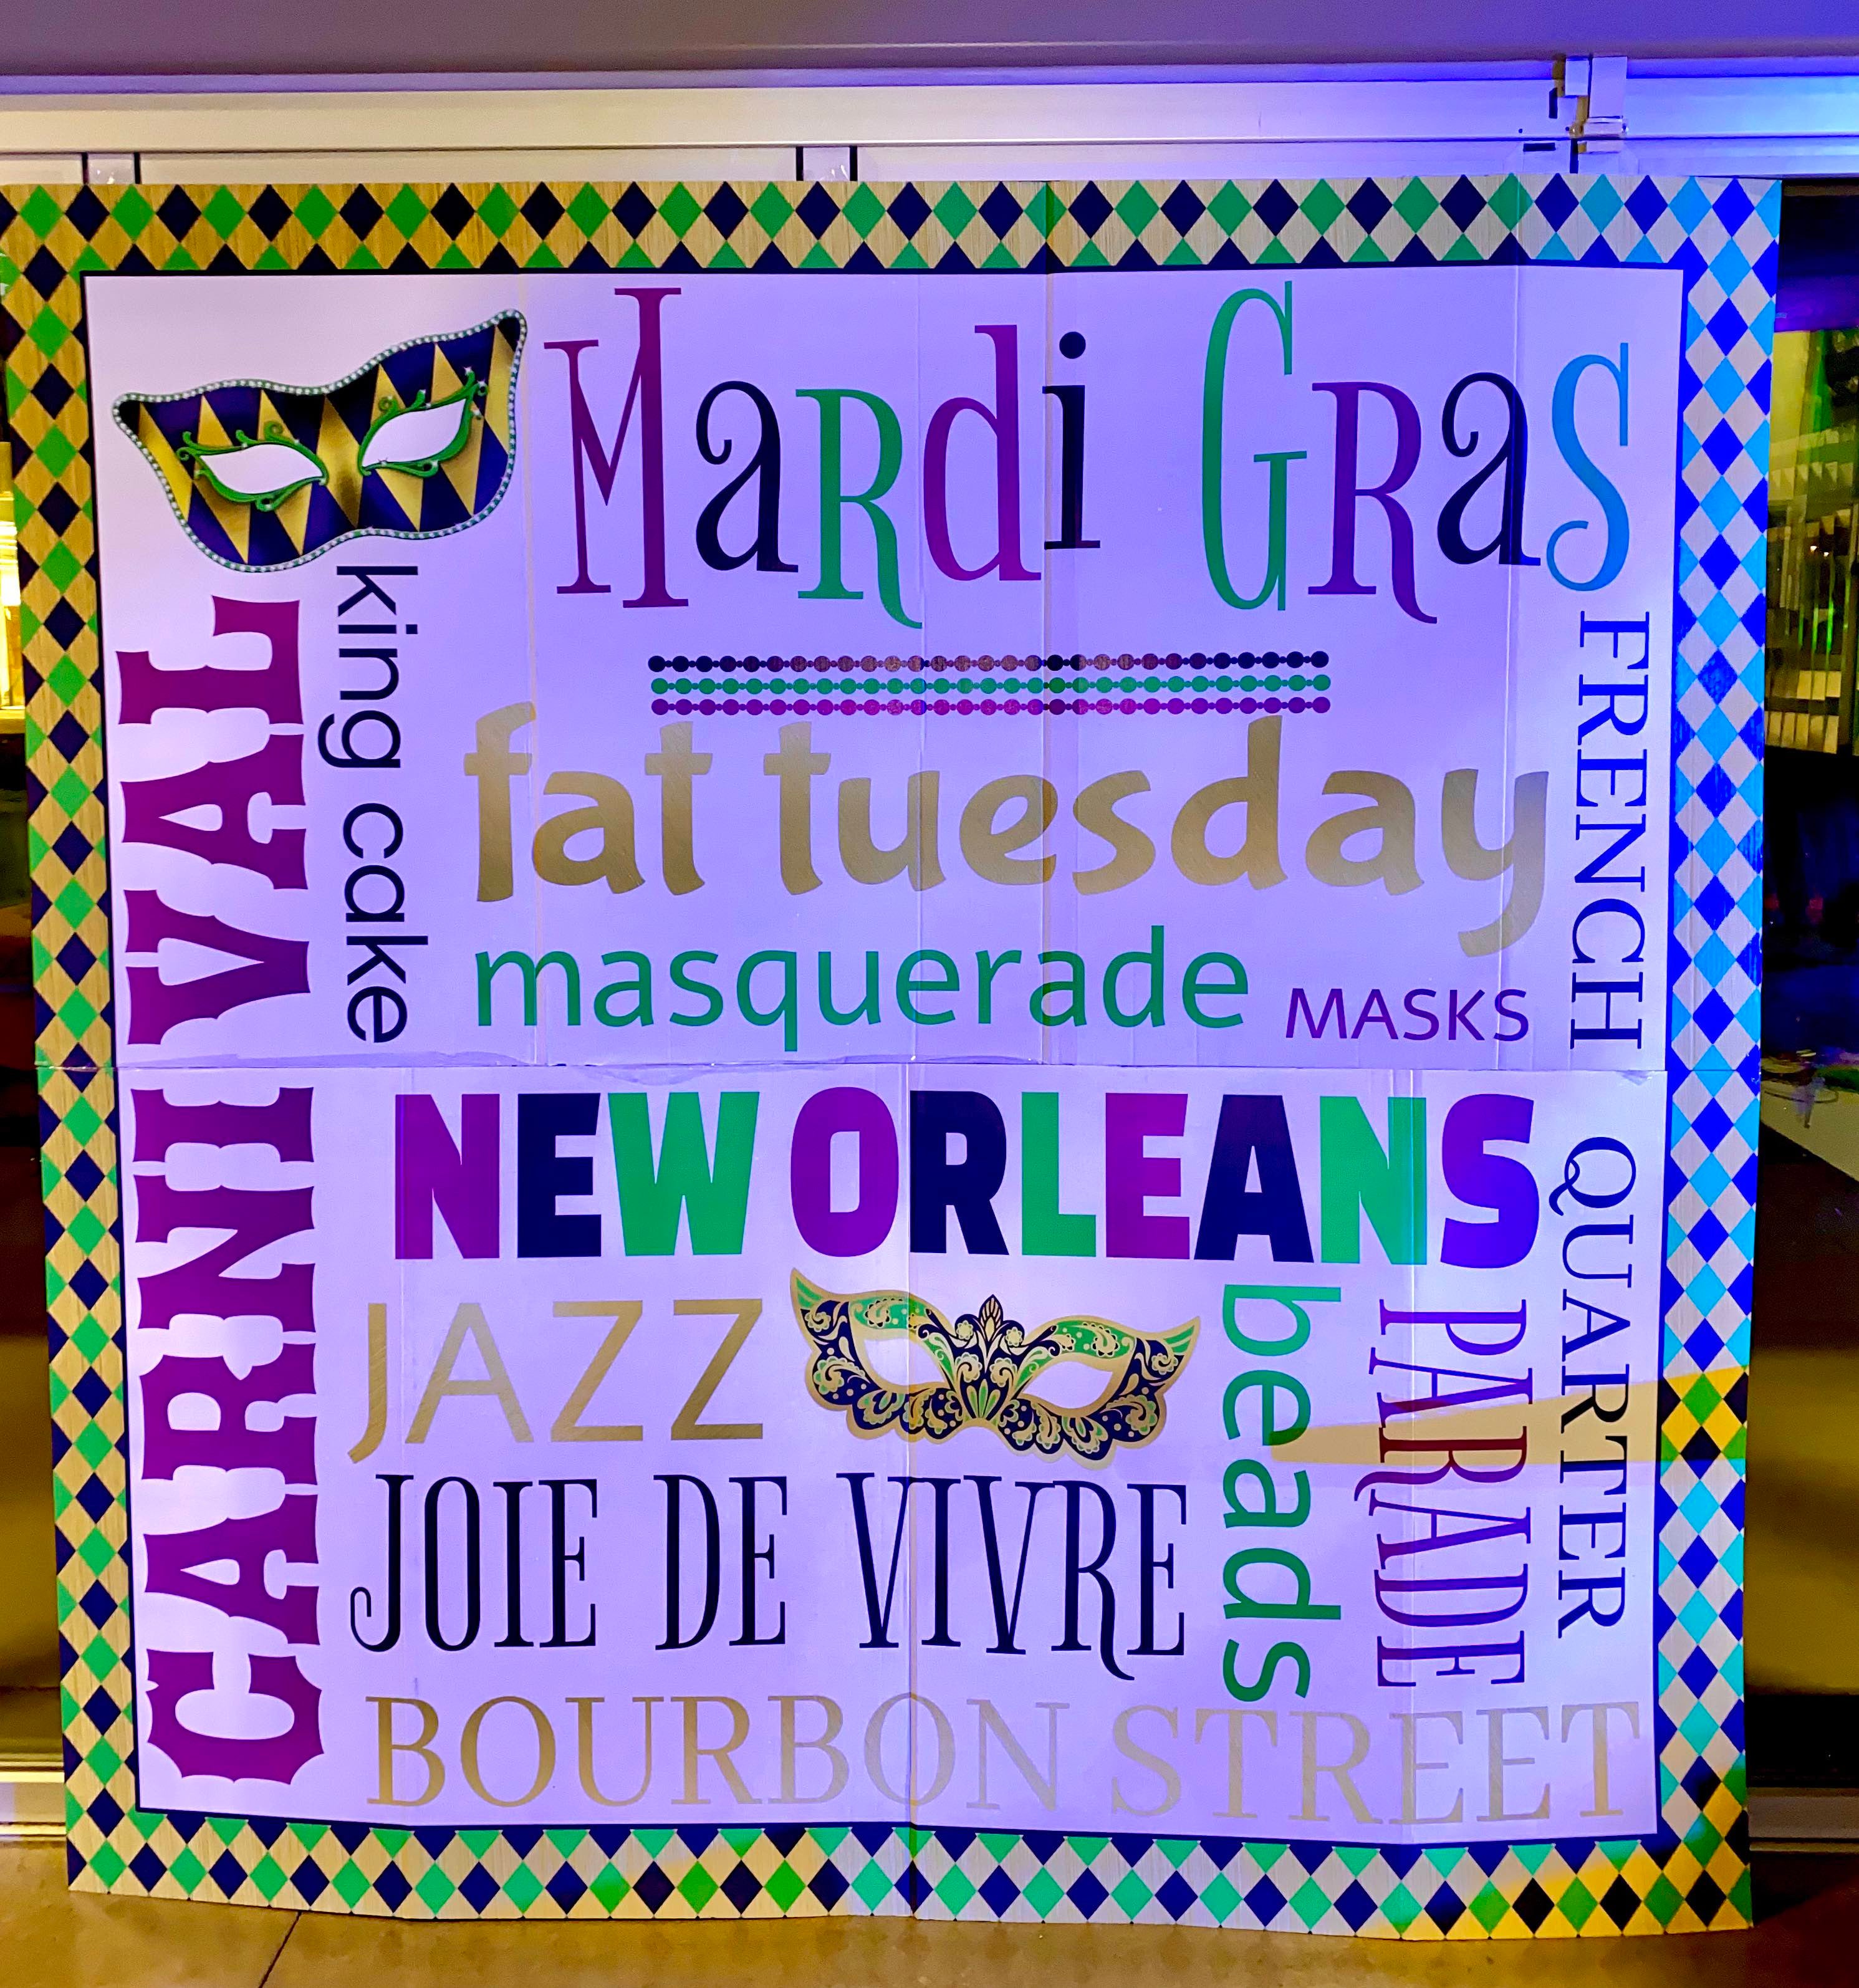 a mardi gras themed banner filled with text phrases like "new orleans," "fat tuesday," & "masquerade"